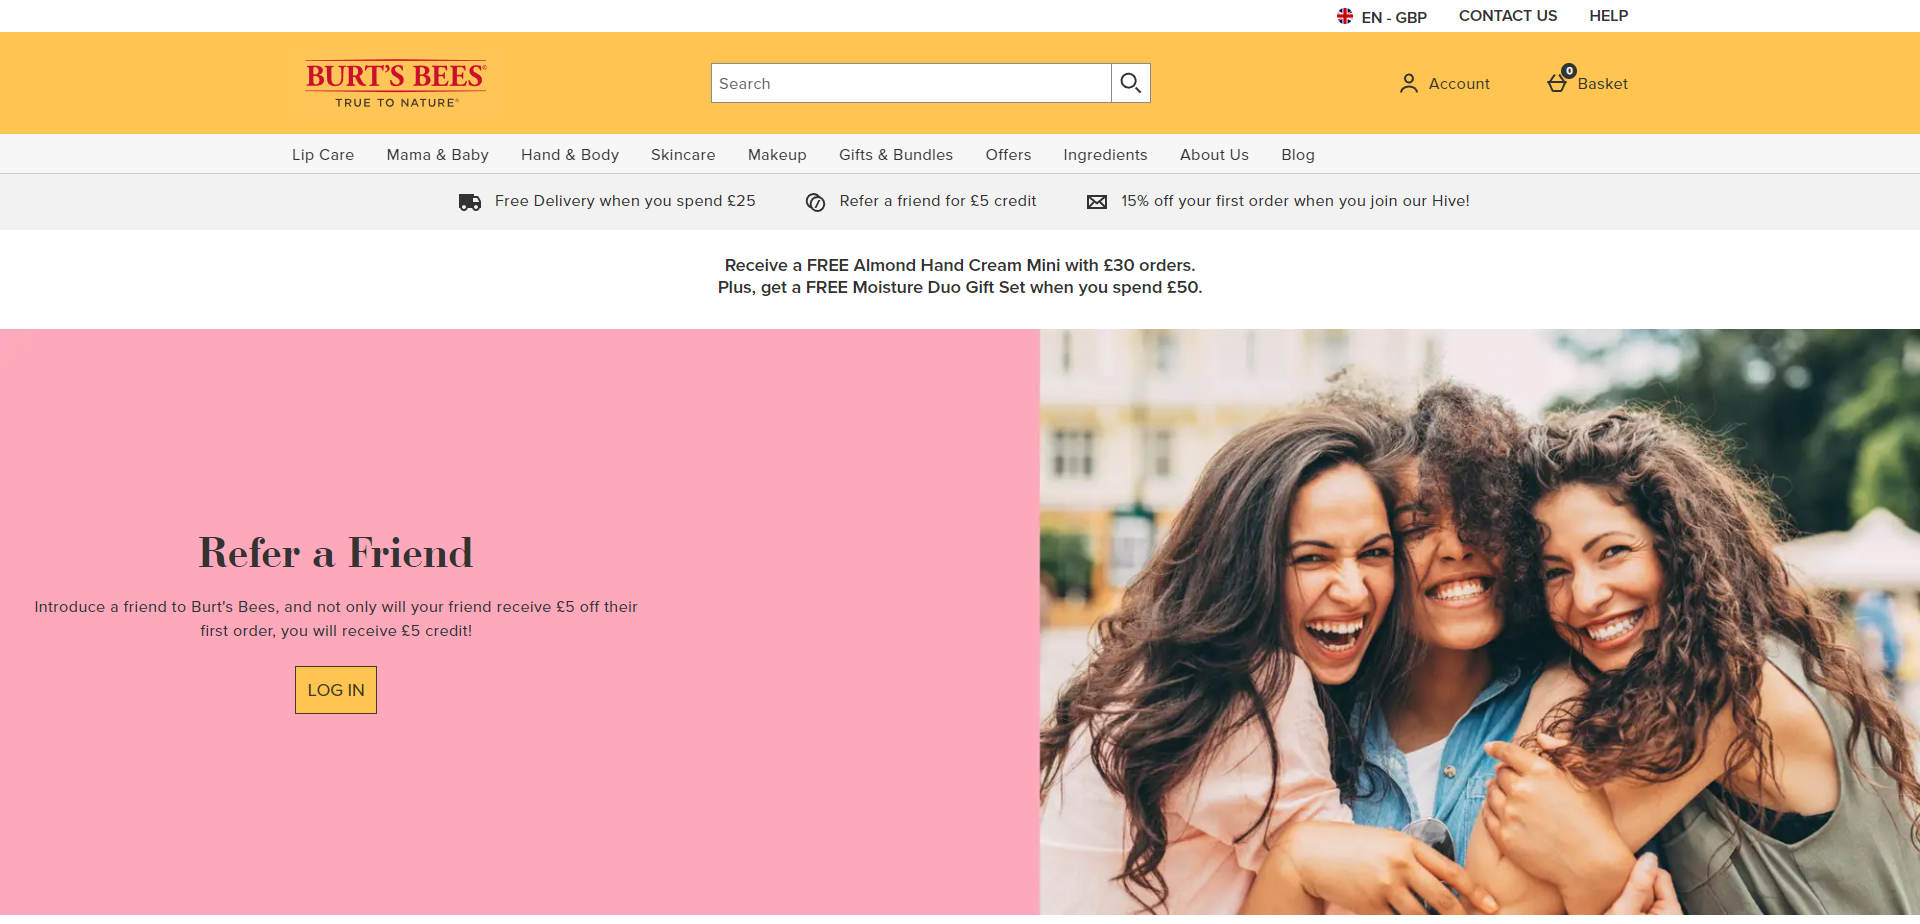 Referral Landing Page for Burts Bees